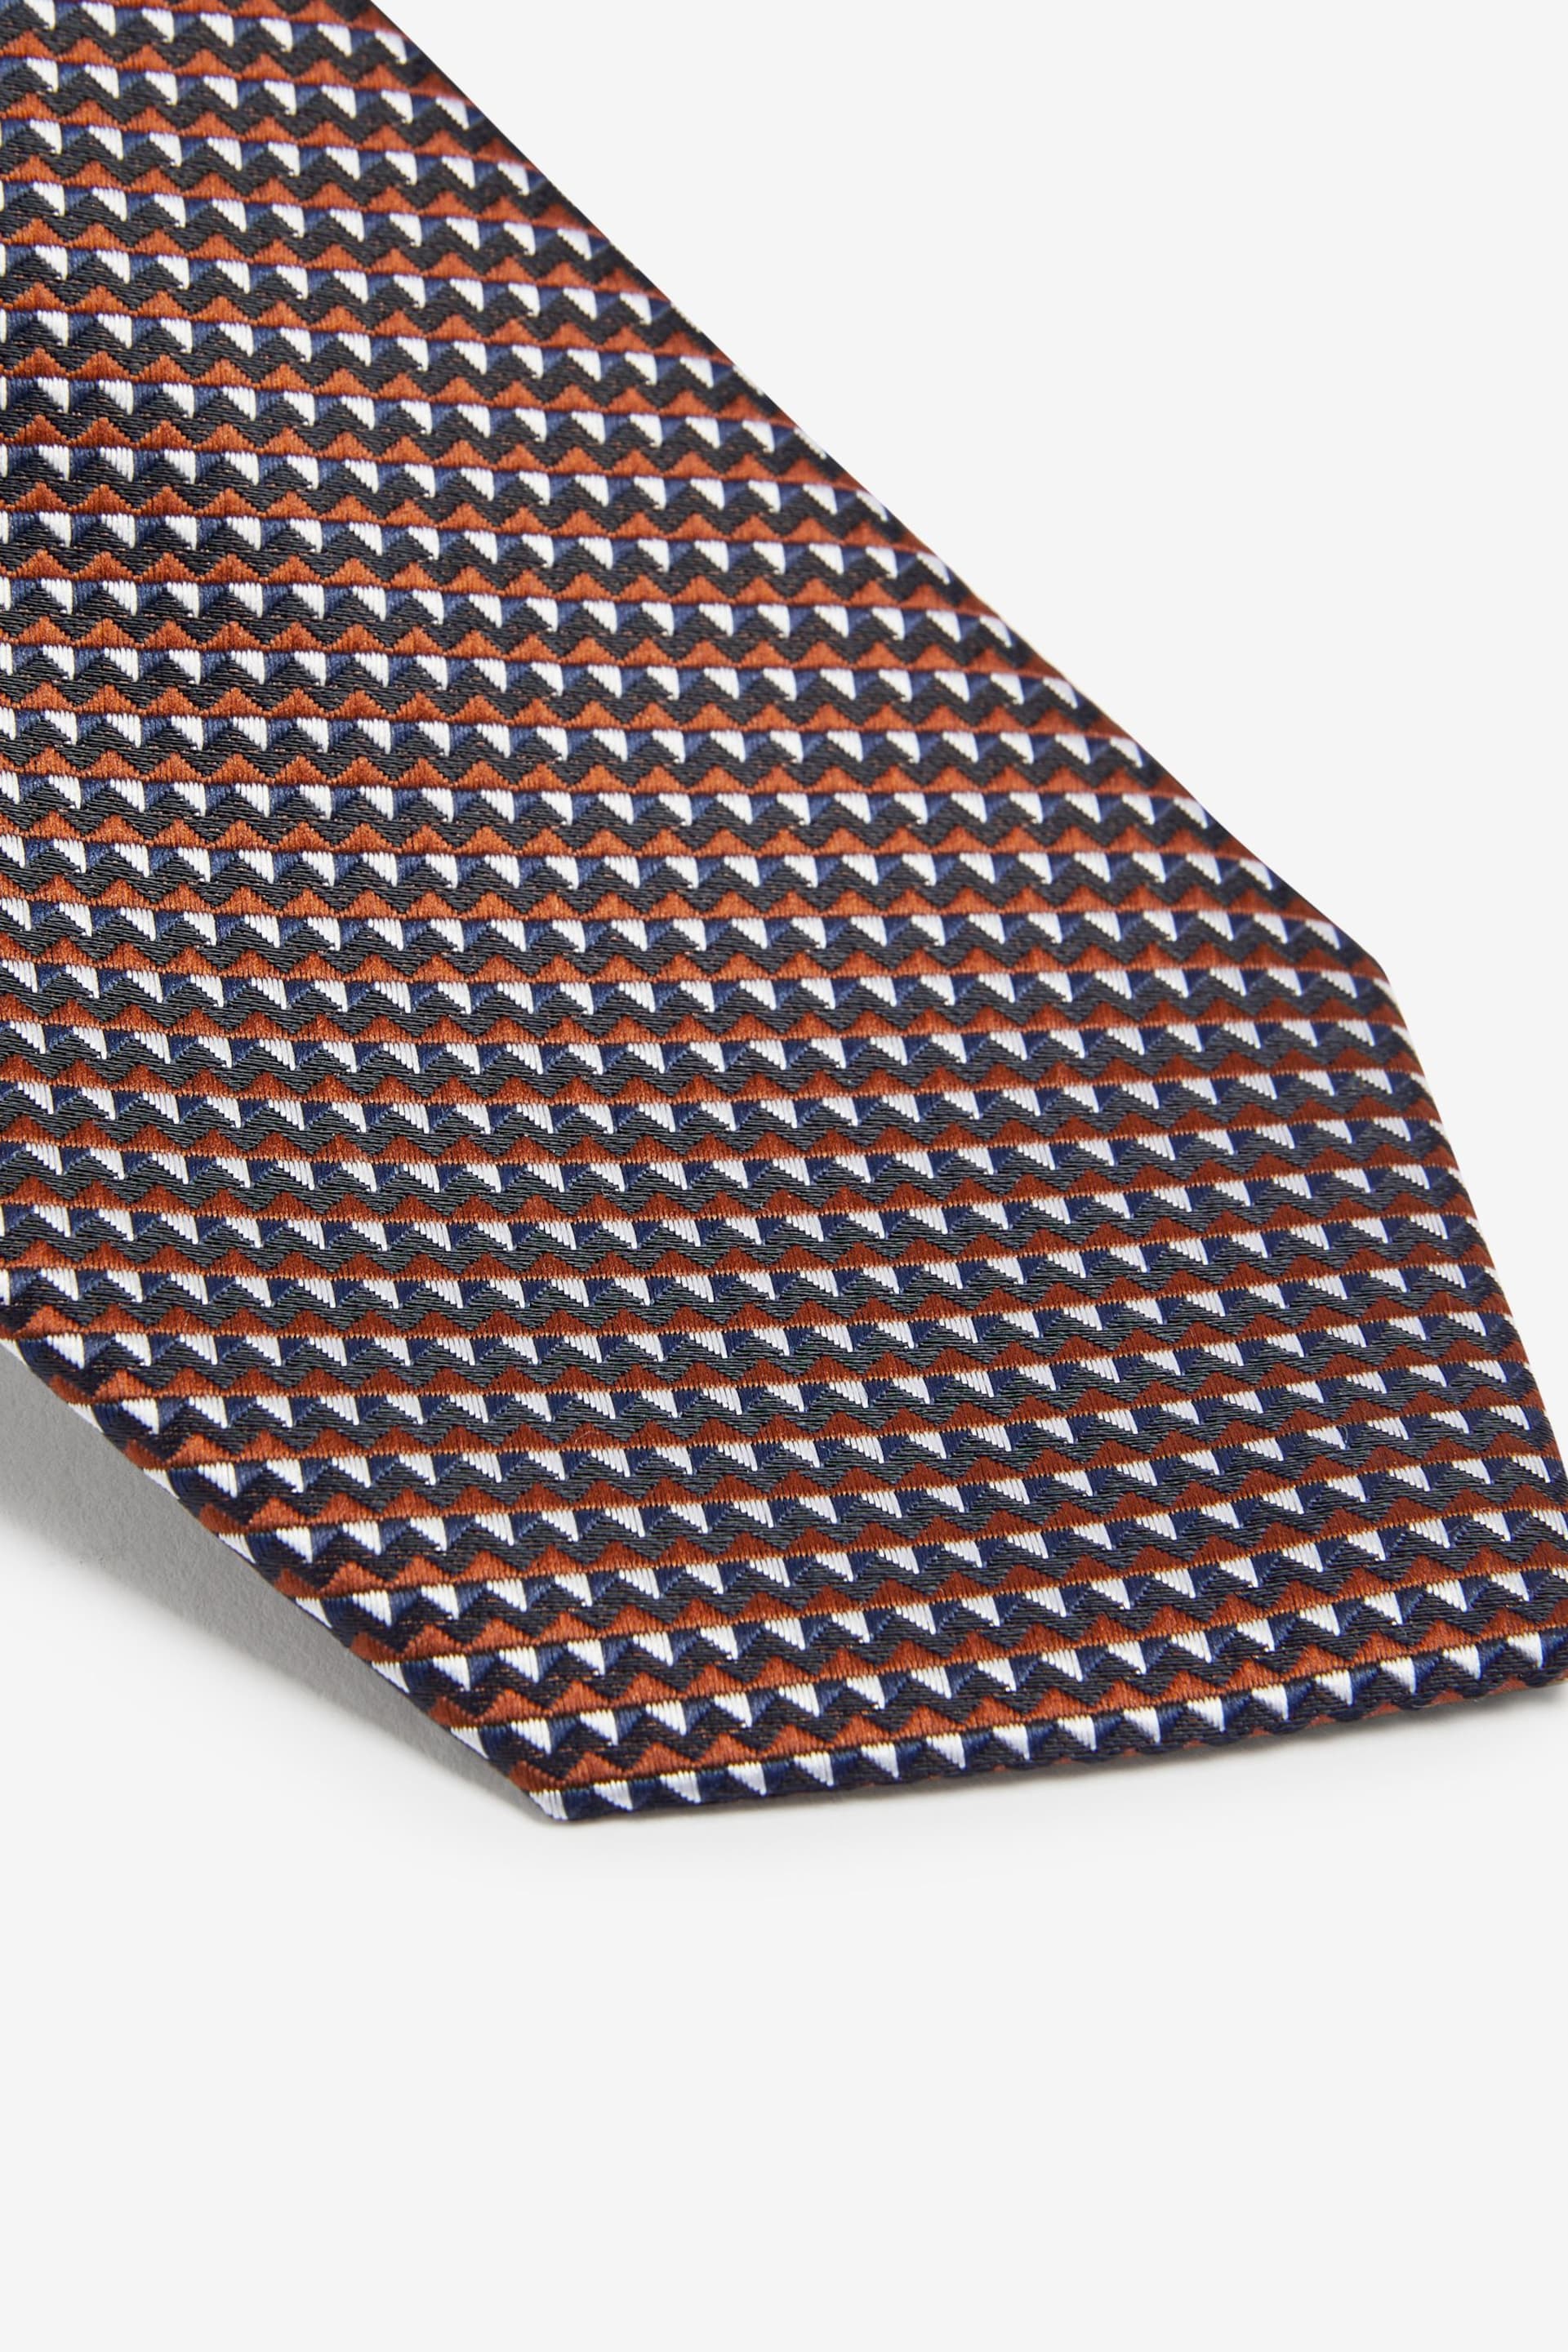 Navy Blue/Rust Brown Textured Tie With Tie Clips 2 Pack - Image 6 of 8